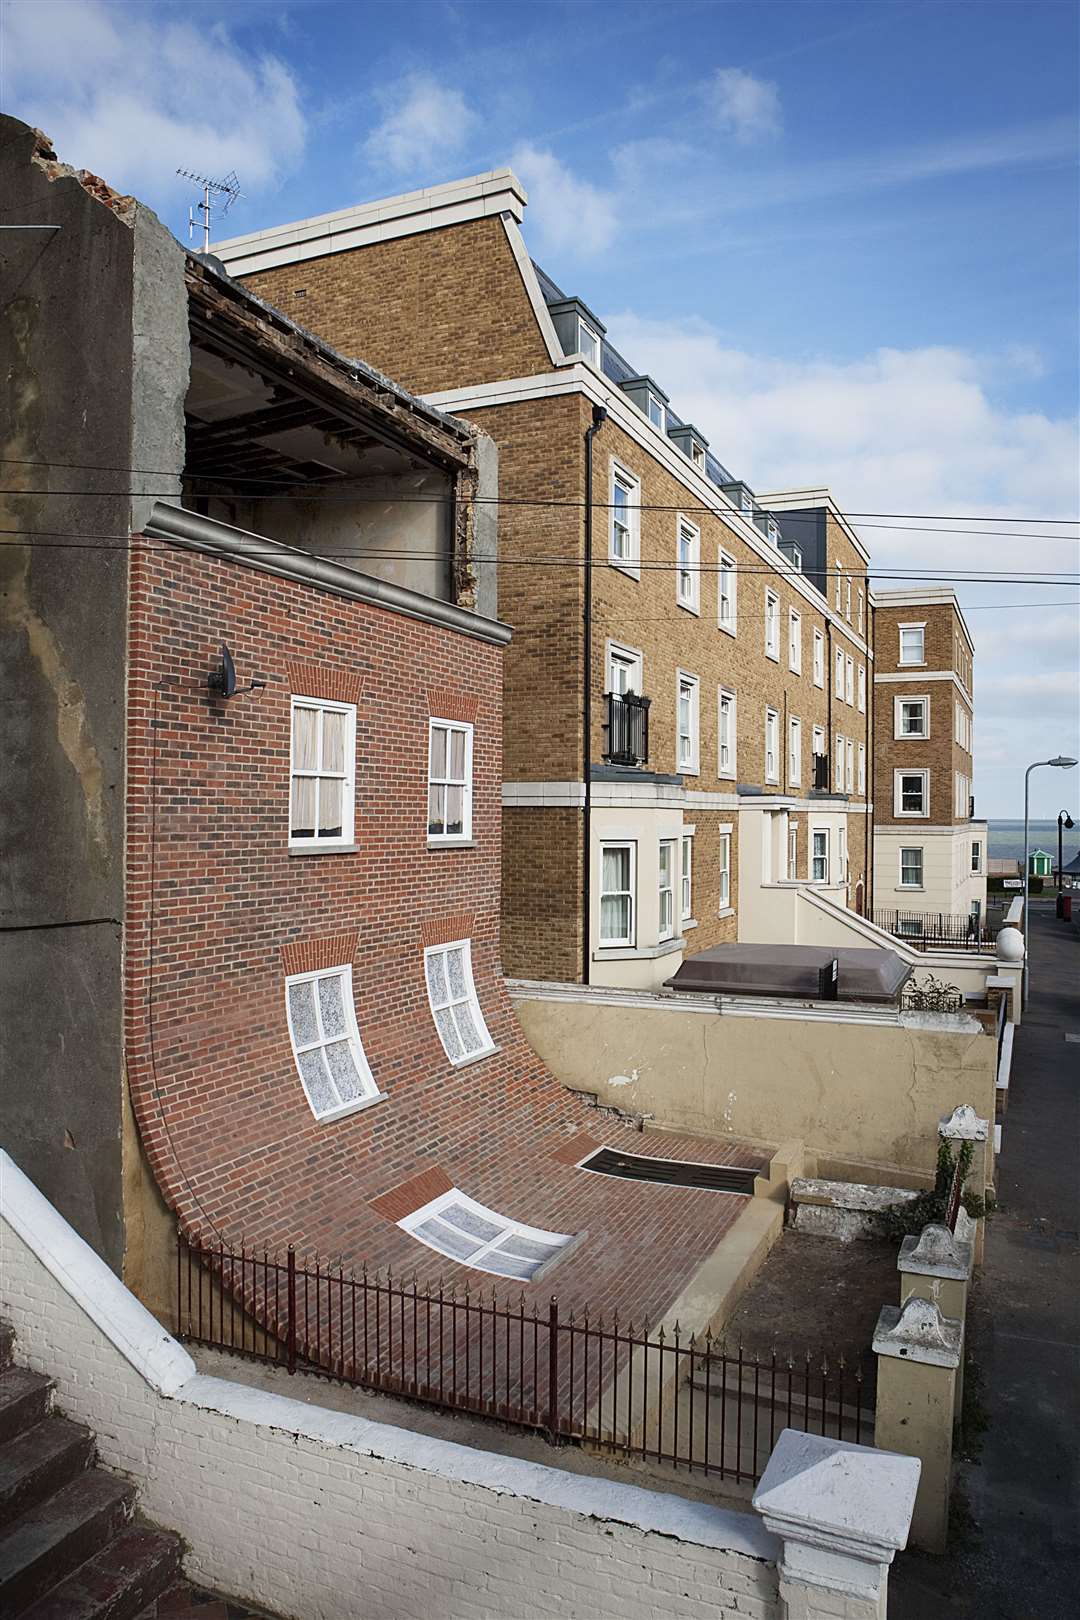 Chinneck's sliding house work named From the Knees of my Nose to the Belly of my Toes was installed on an empty Margate house in 2013